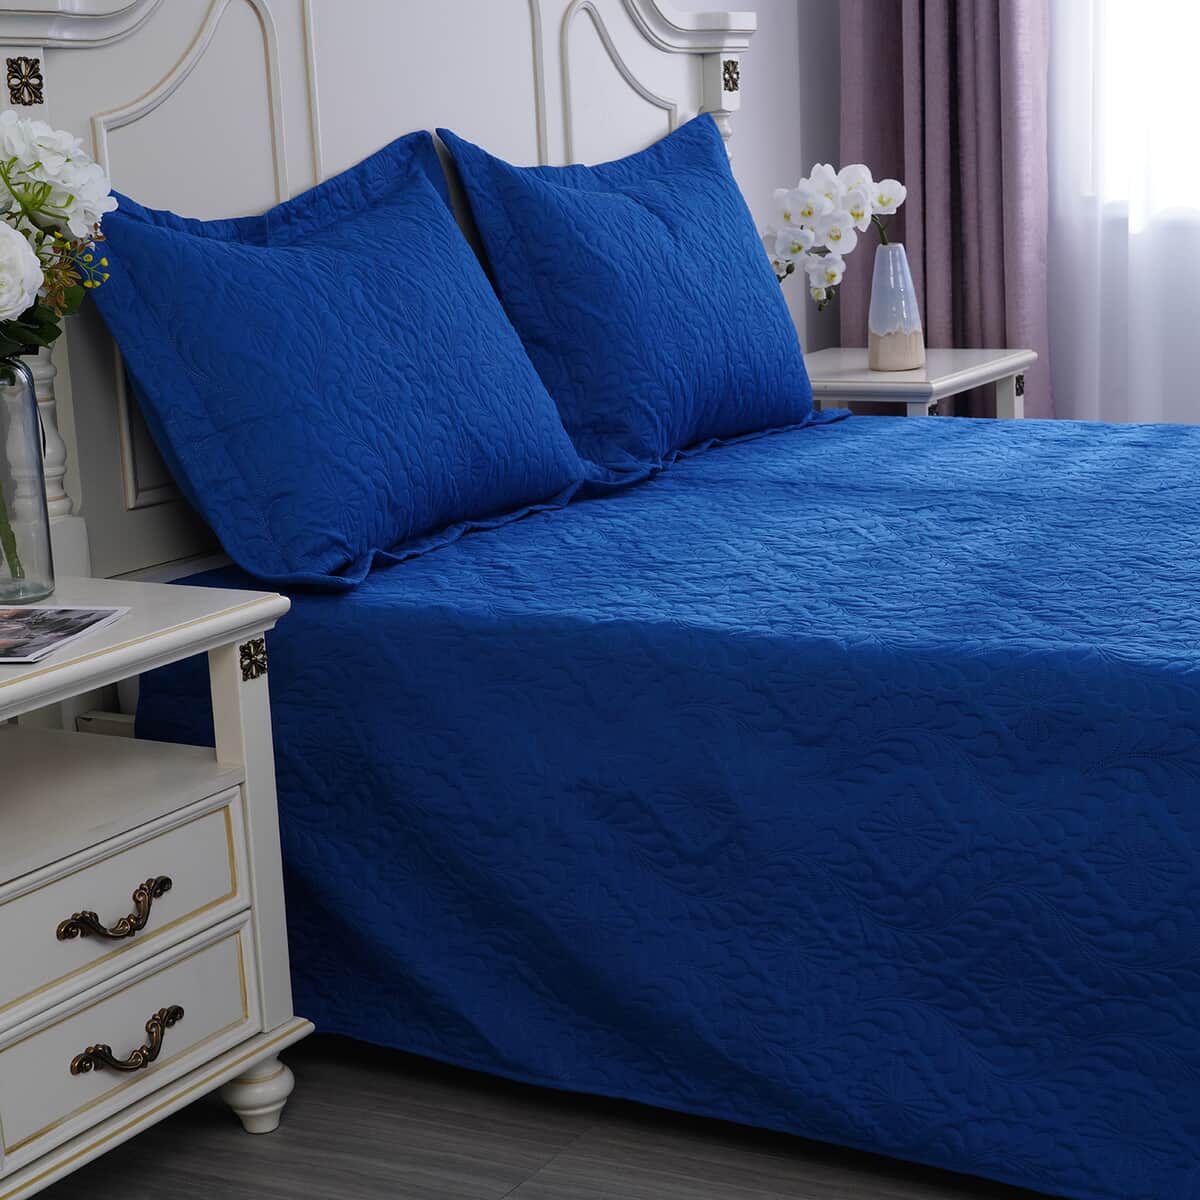 Homesmart 3 Pcs Solid Blue Pinsonic Quilt Bedding Set - Queen Size image number 2